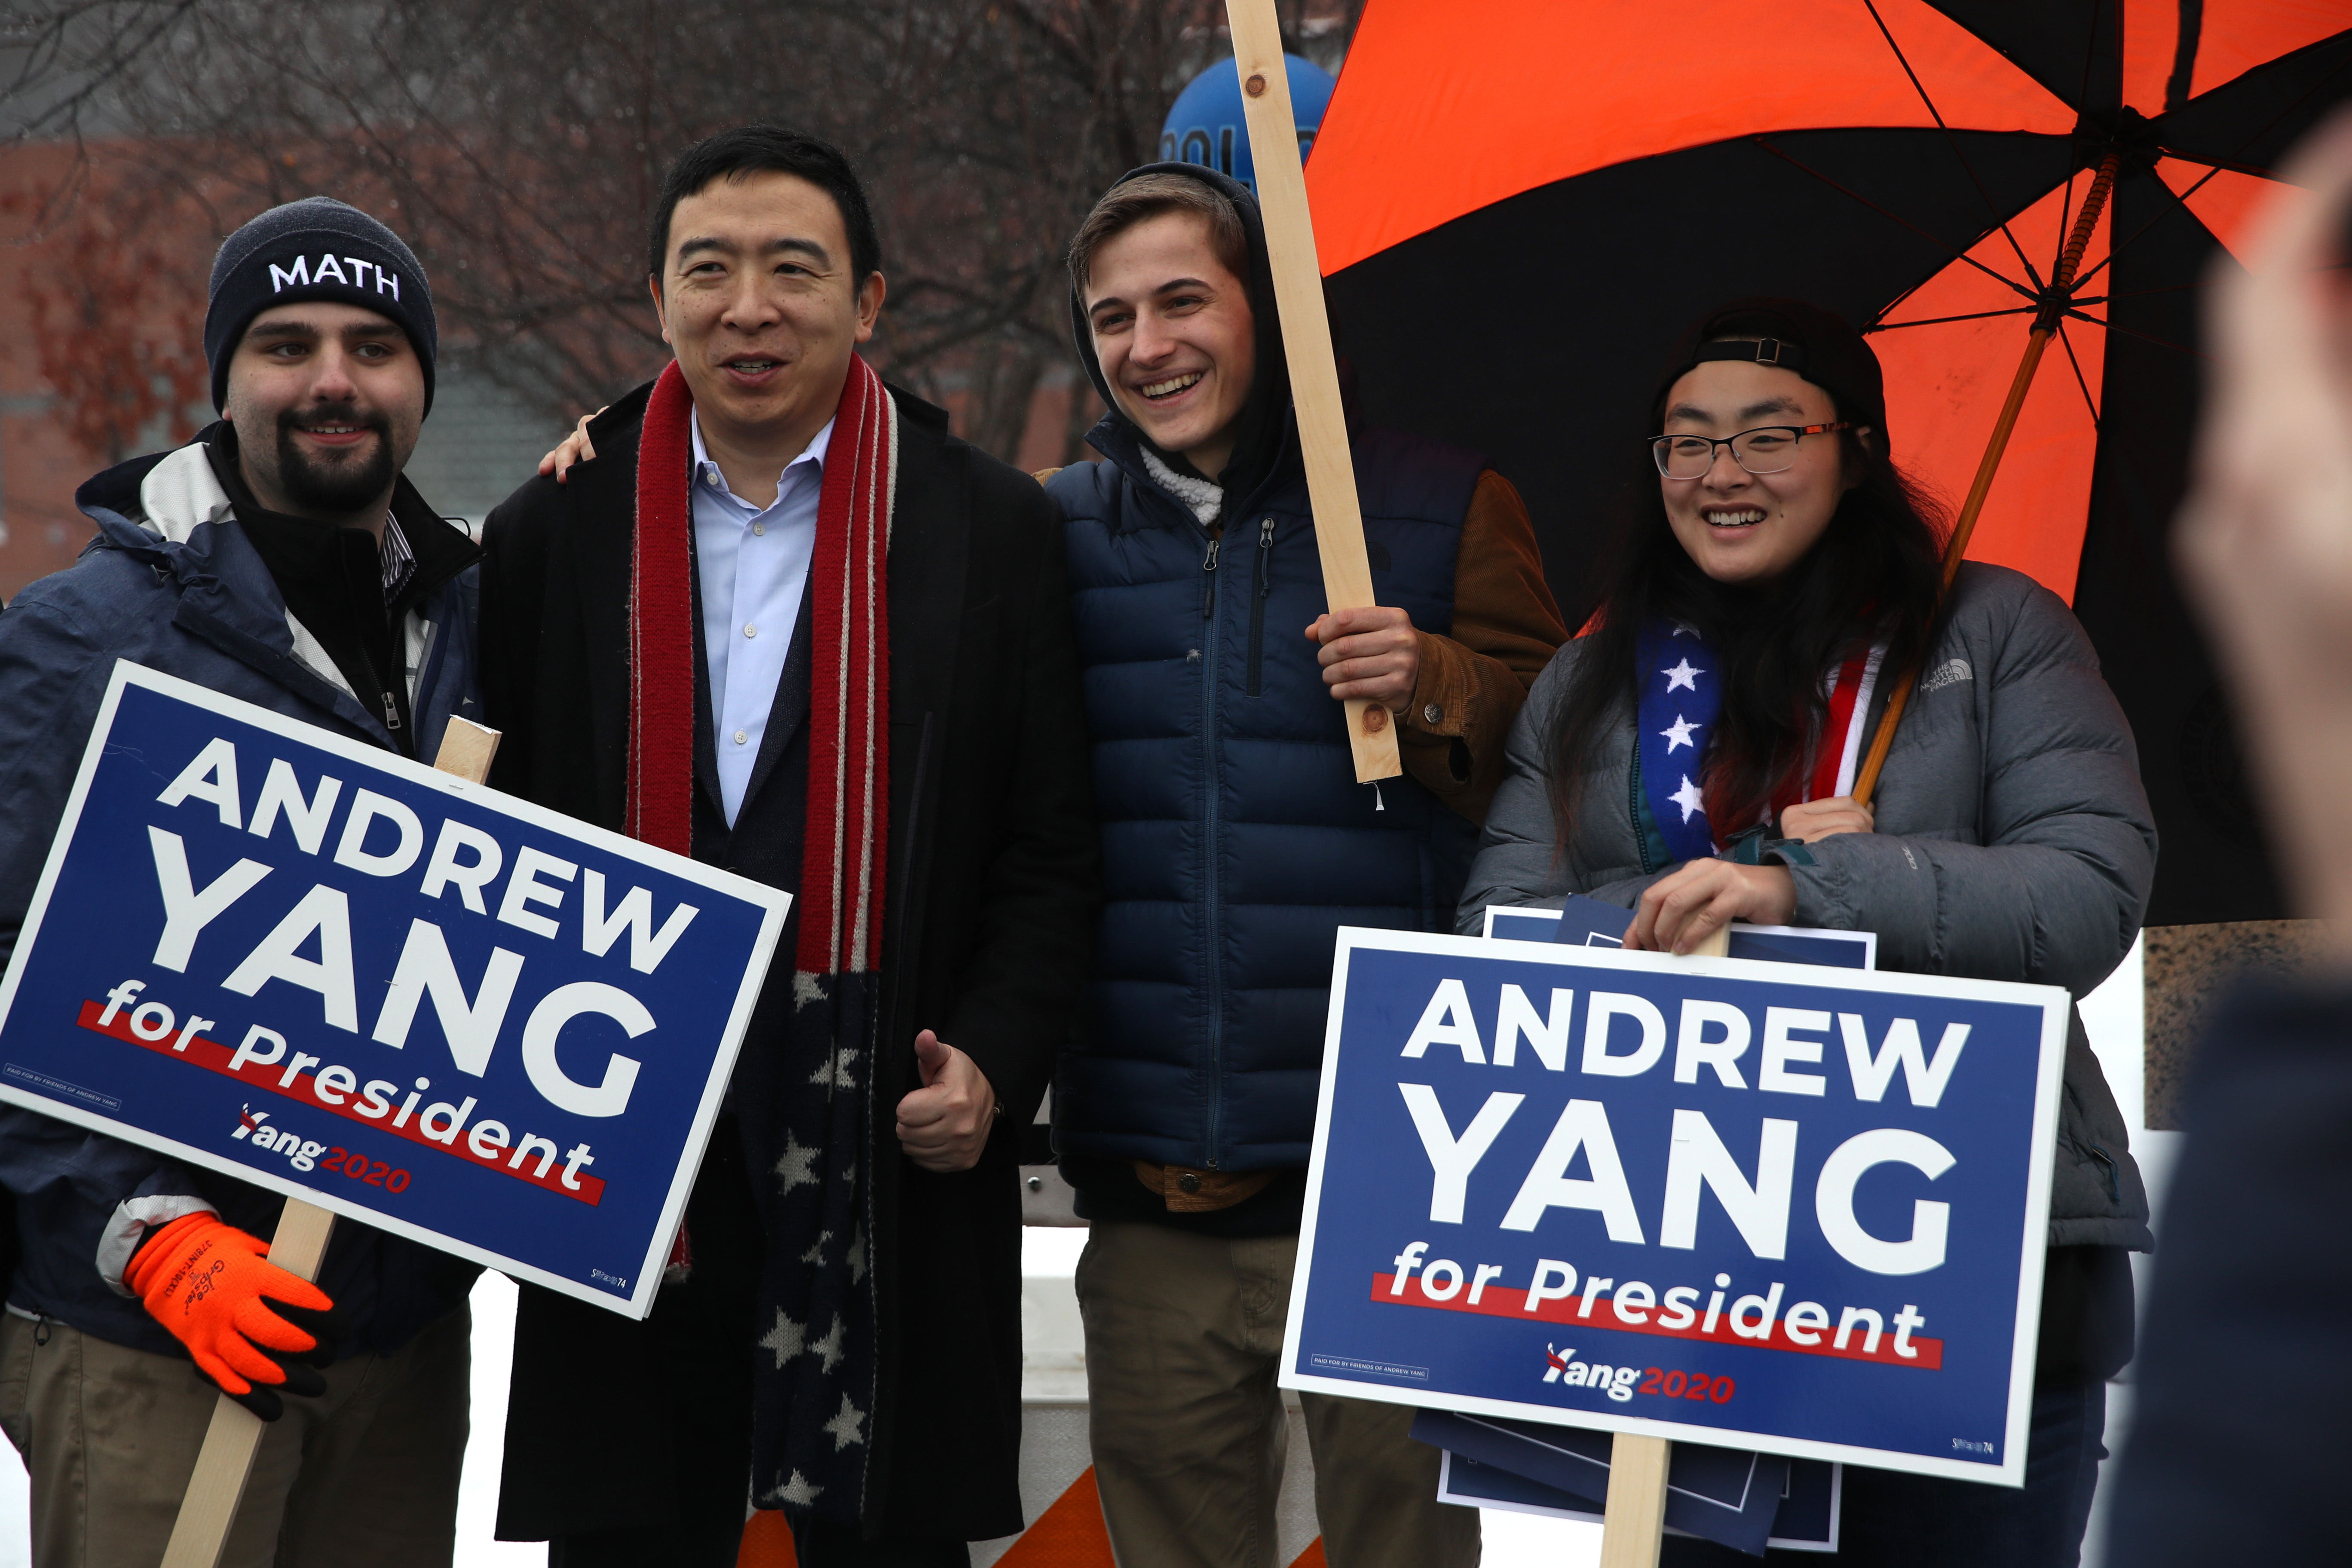 Democratic presidential candidate Andrew Yang take a photo with supporters who are holding campaign signs in front of a polling station on February 11, 2020 in Keene, New Hampshire. (Photo by Justin Sullivan/Getty Images)